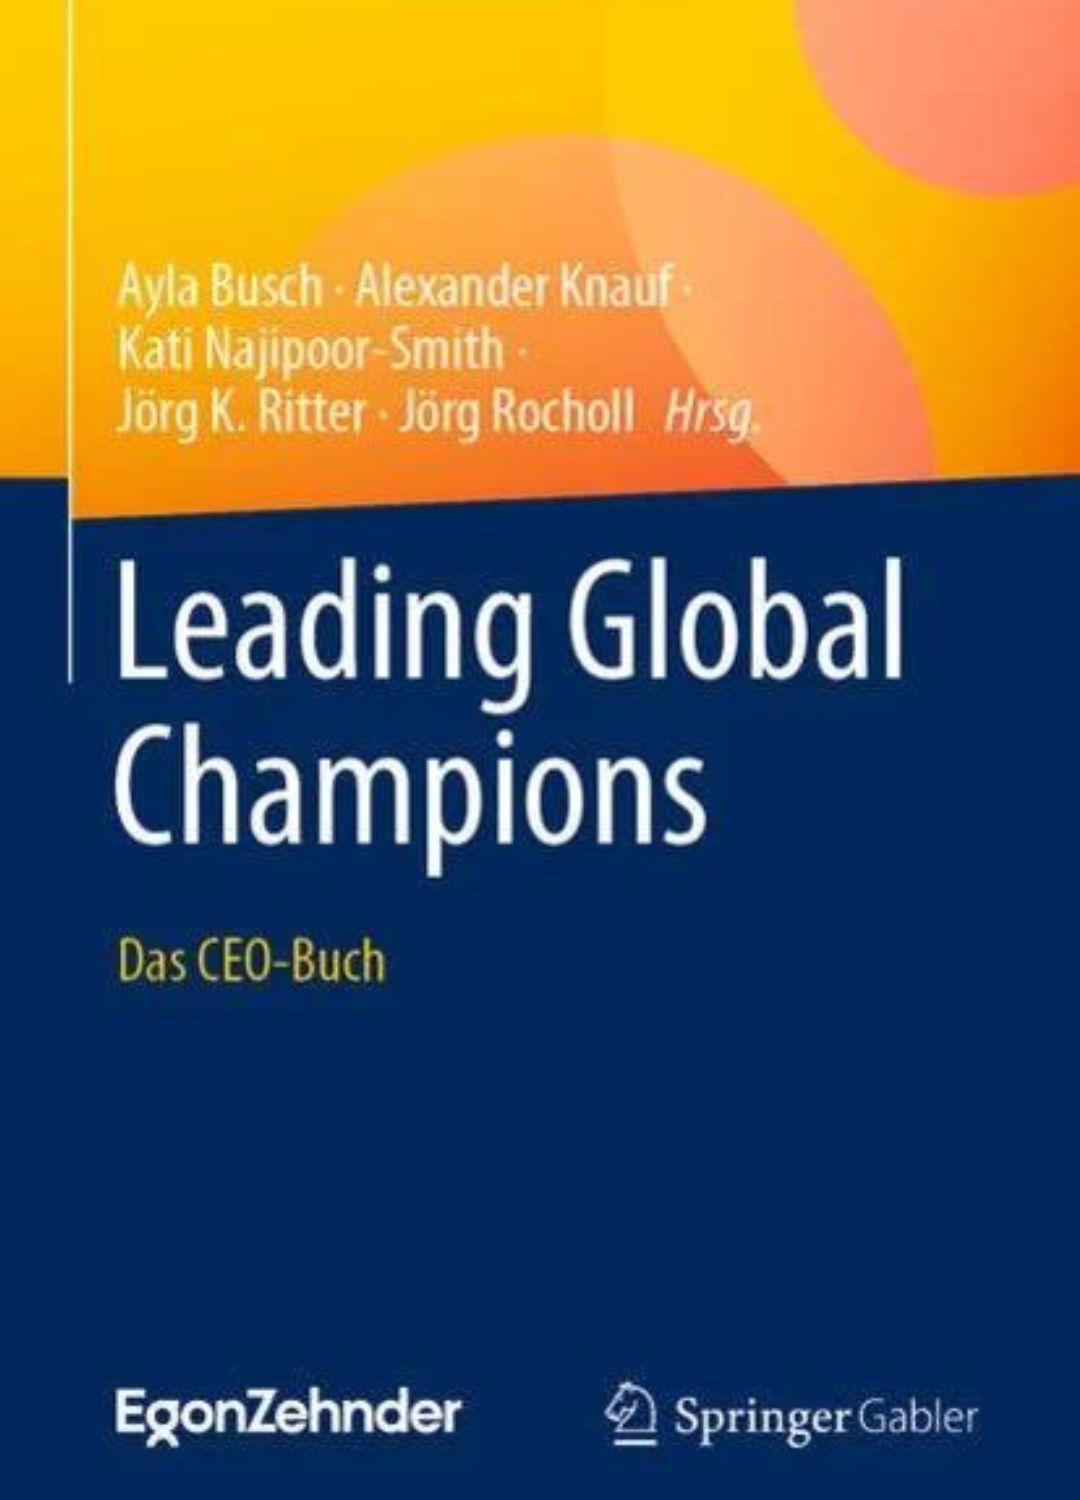 Explore the secrets of global business excellence with insights from 50 top leaders in collaboration with the Hidden Champions Institute (HCI)at ESMT Berlin, the BDI, and Egon Zehnder. The authors unveil critical success factors for leadership and development in an exclusive gathering of 250 to 300 CEOs and chairpersons from these elite companies.  Learn more about the book